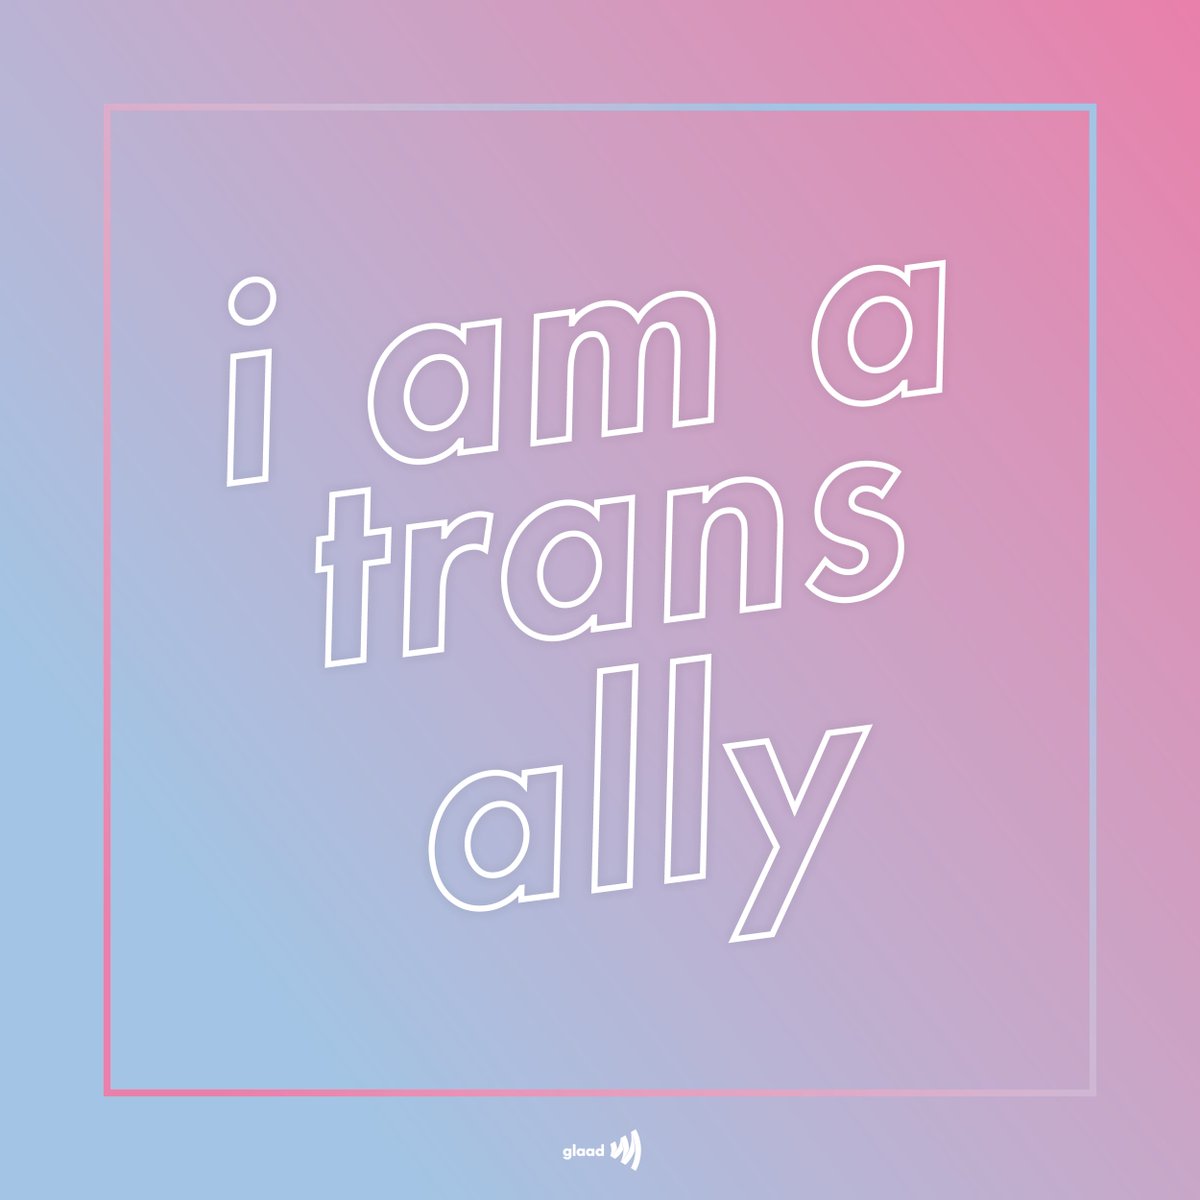 Retweet if you're a trans ally and stand with trans people today and always.